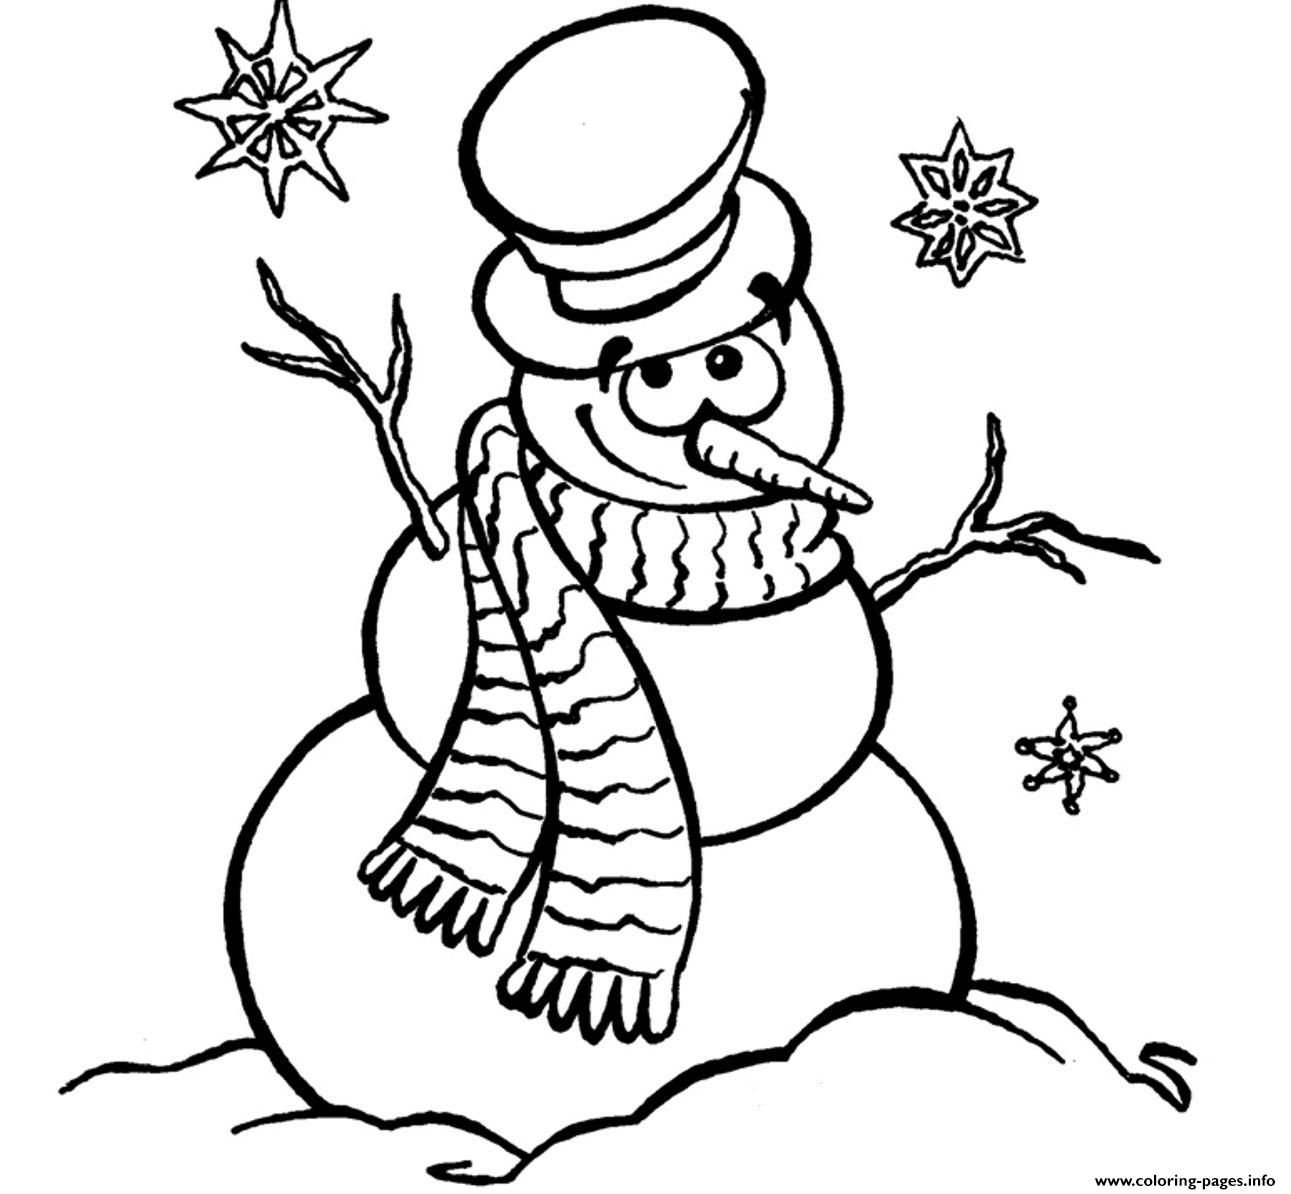 Smilling Snowman Sdc21 coloring